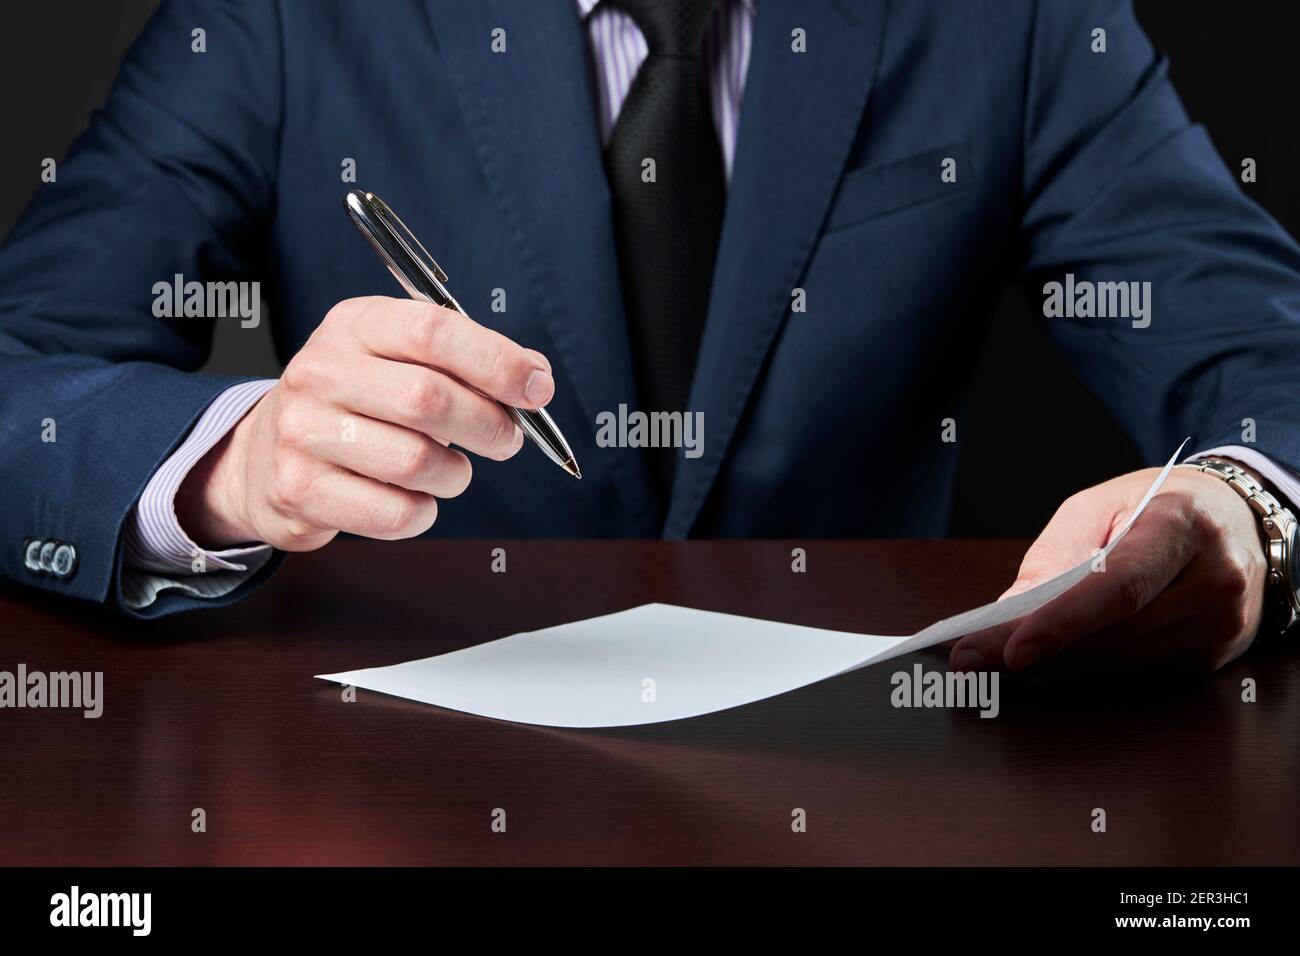 businessman sign a document. business contract or agreement concept Stock Photo